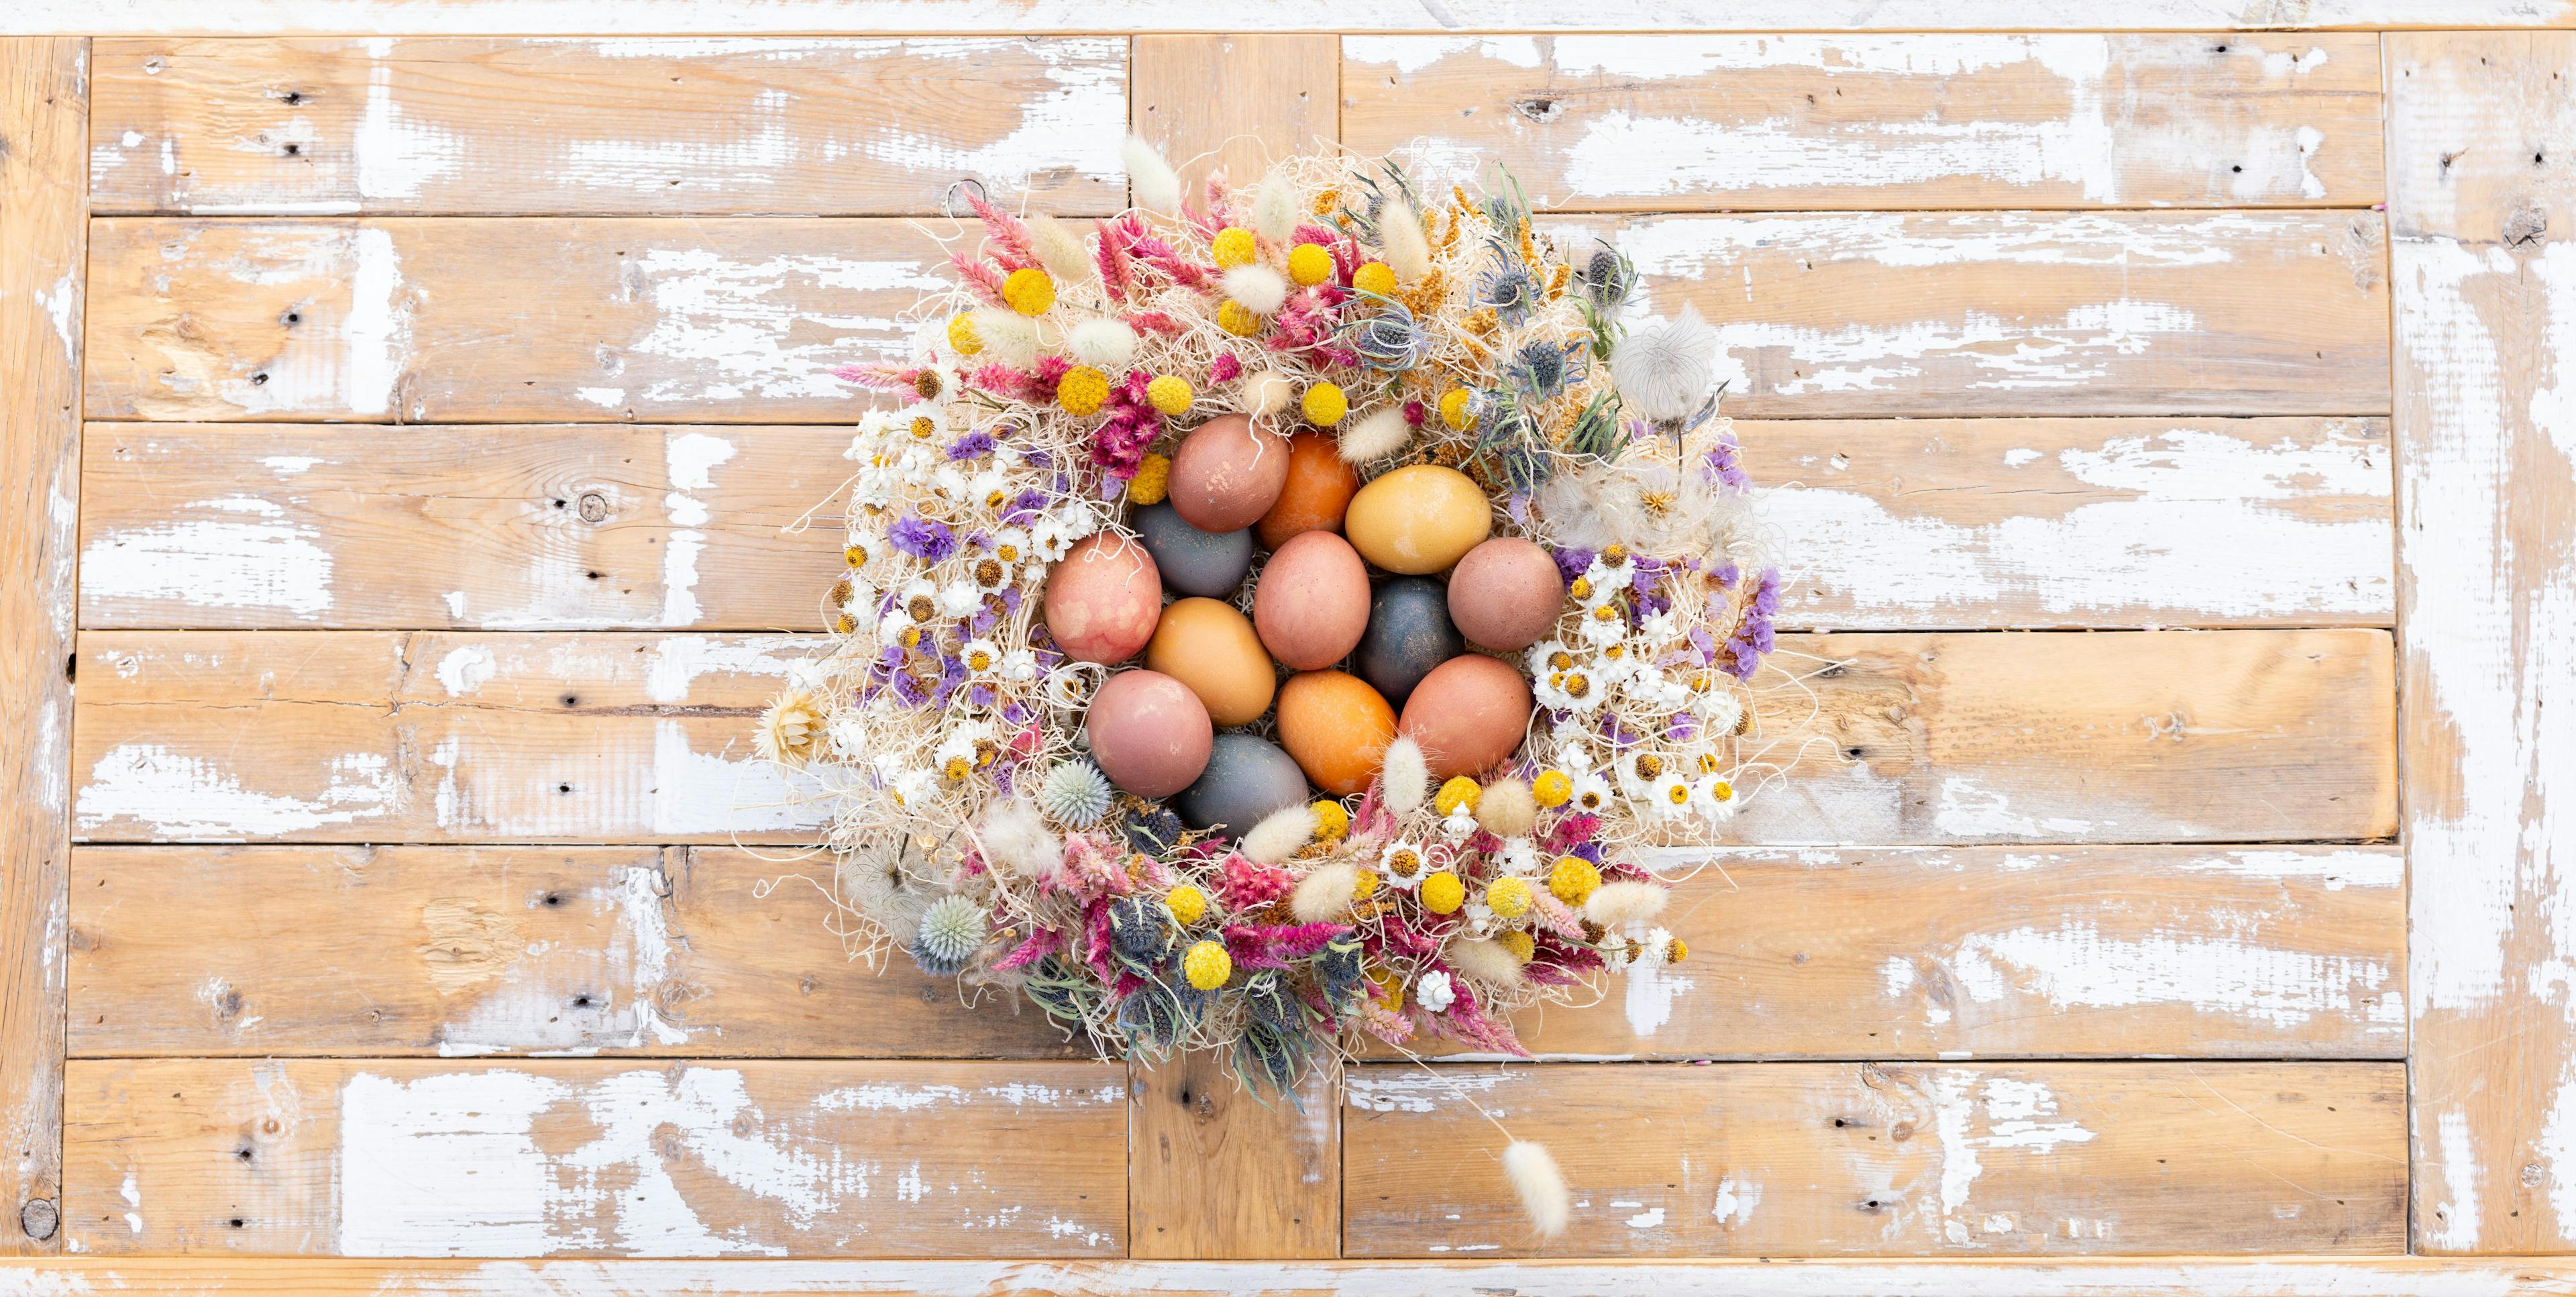 Naturally dyed eggs set in an arrangement of flowers.